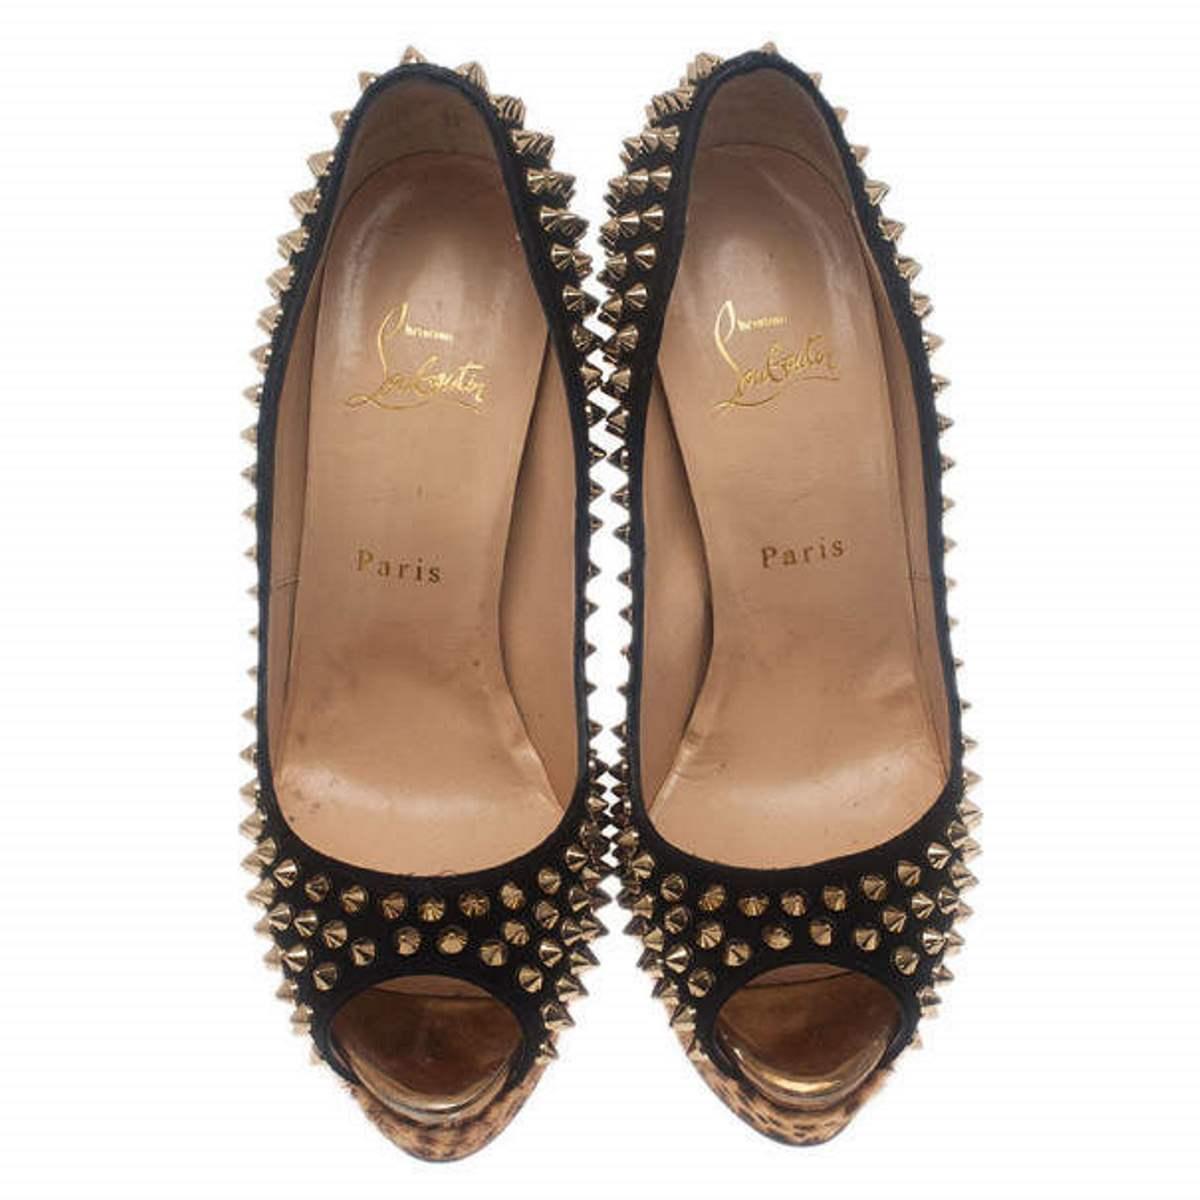 Add these edgy Christian Louboutin Lady Peep Spikes Platform Pumps to make any outfit pop. They are crafted from black suede and covered with silver-tone spikes. They feature leopard pony hair detailing around their bottoms, signature red soles and